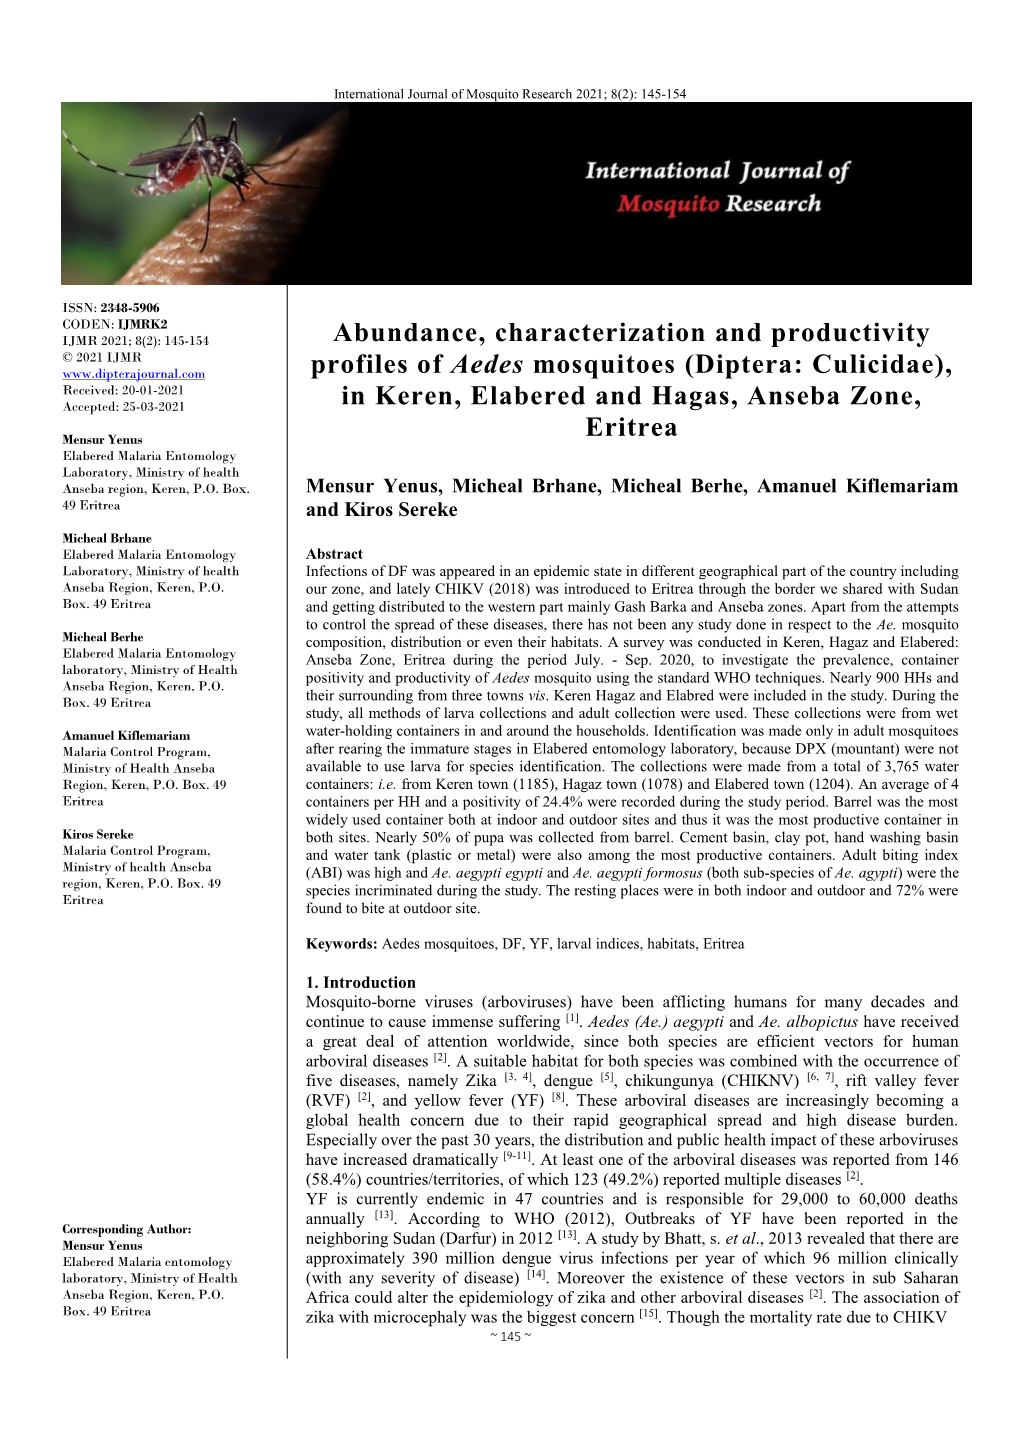 Abundance, Characterization and Productivity Profiles of Aedes